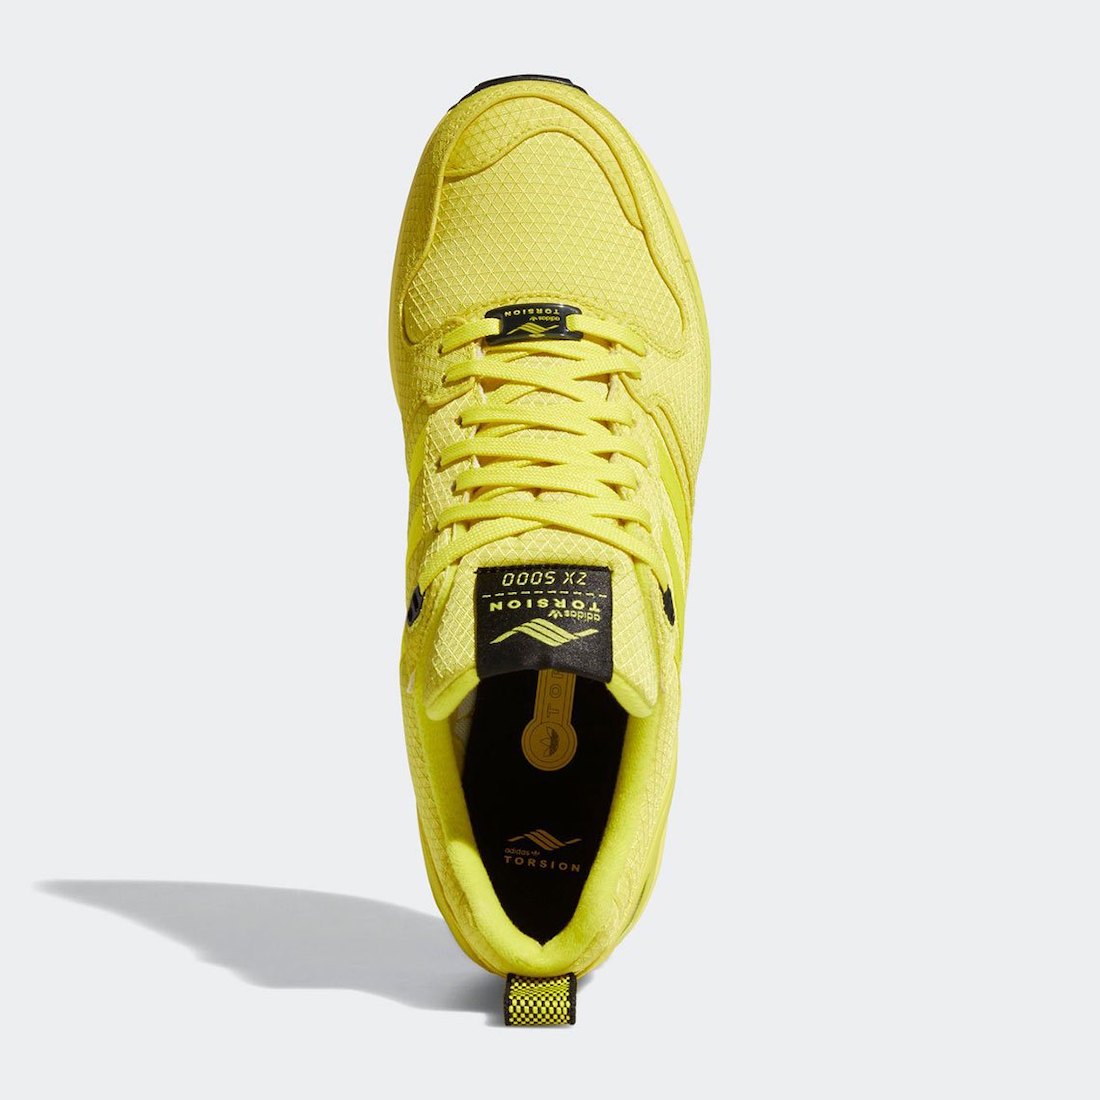 adidas ZX 5000 Bright Yellow FZ4645 Release Date